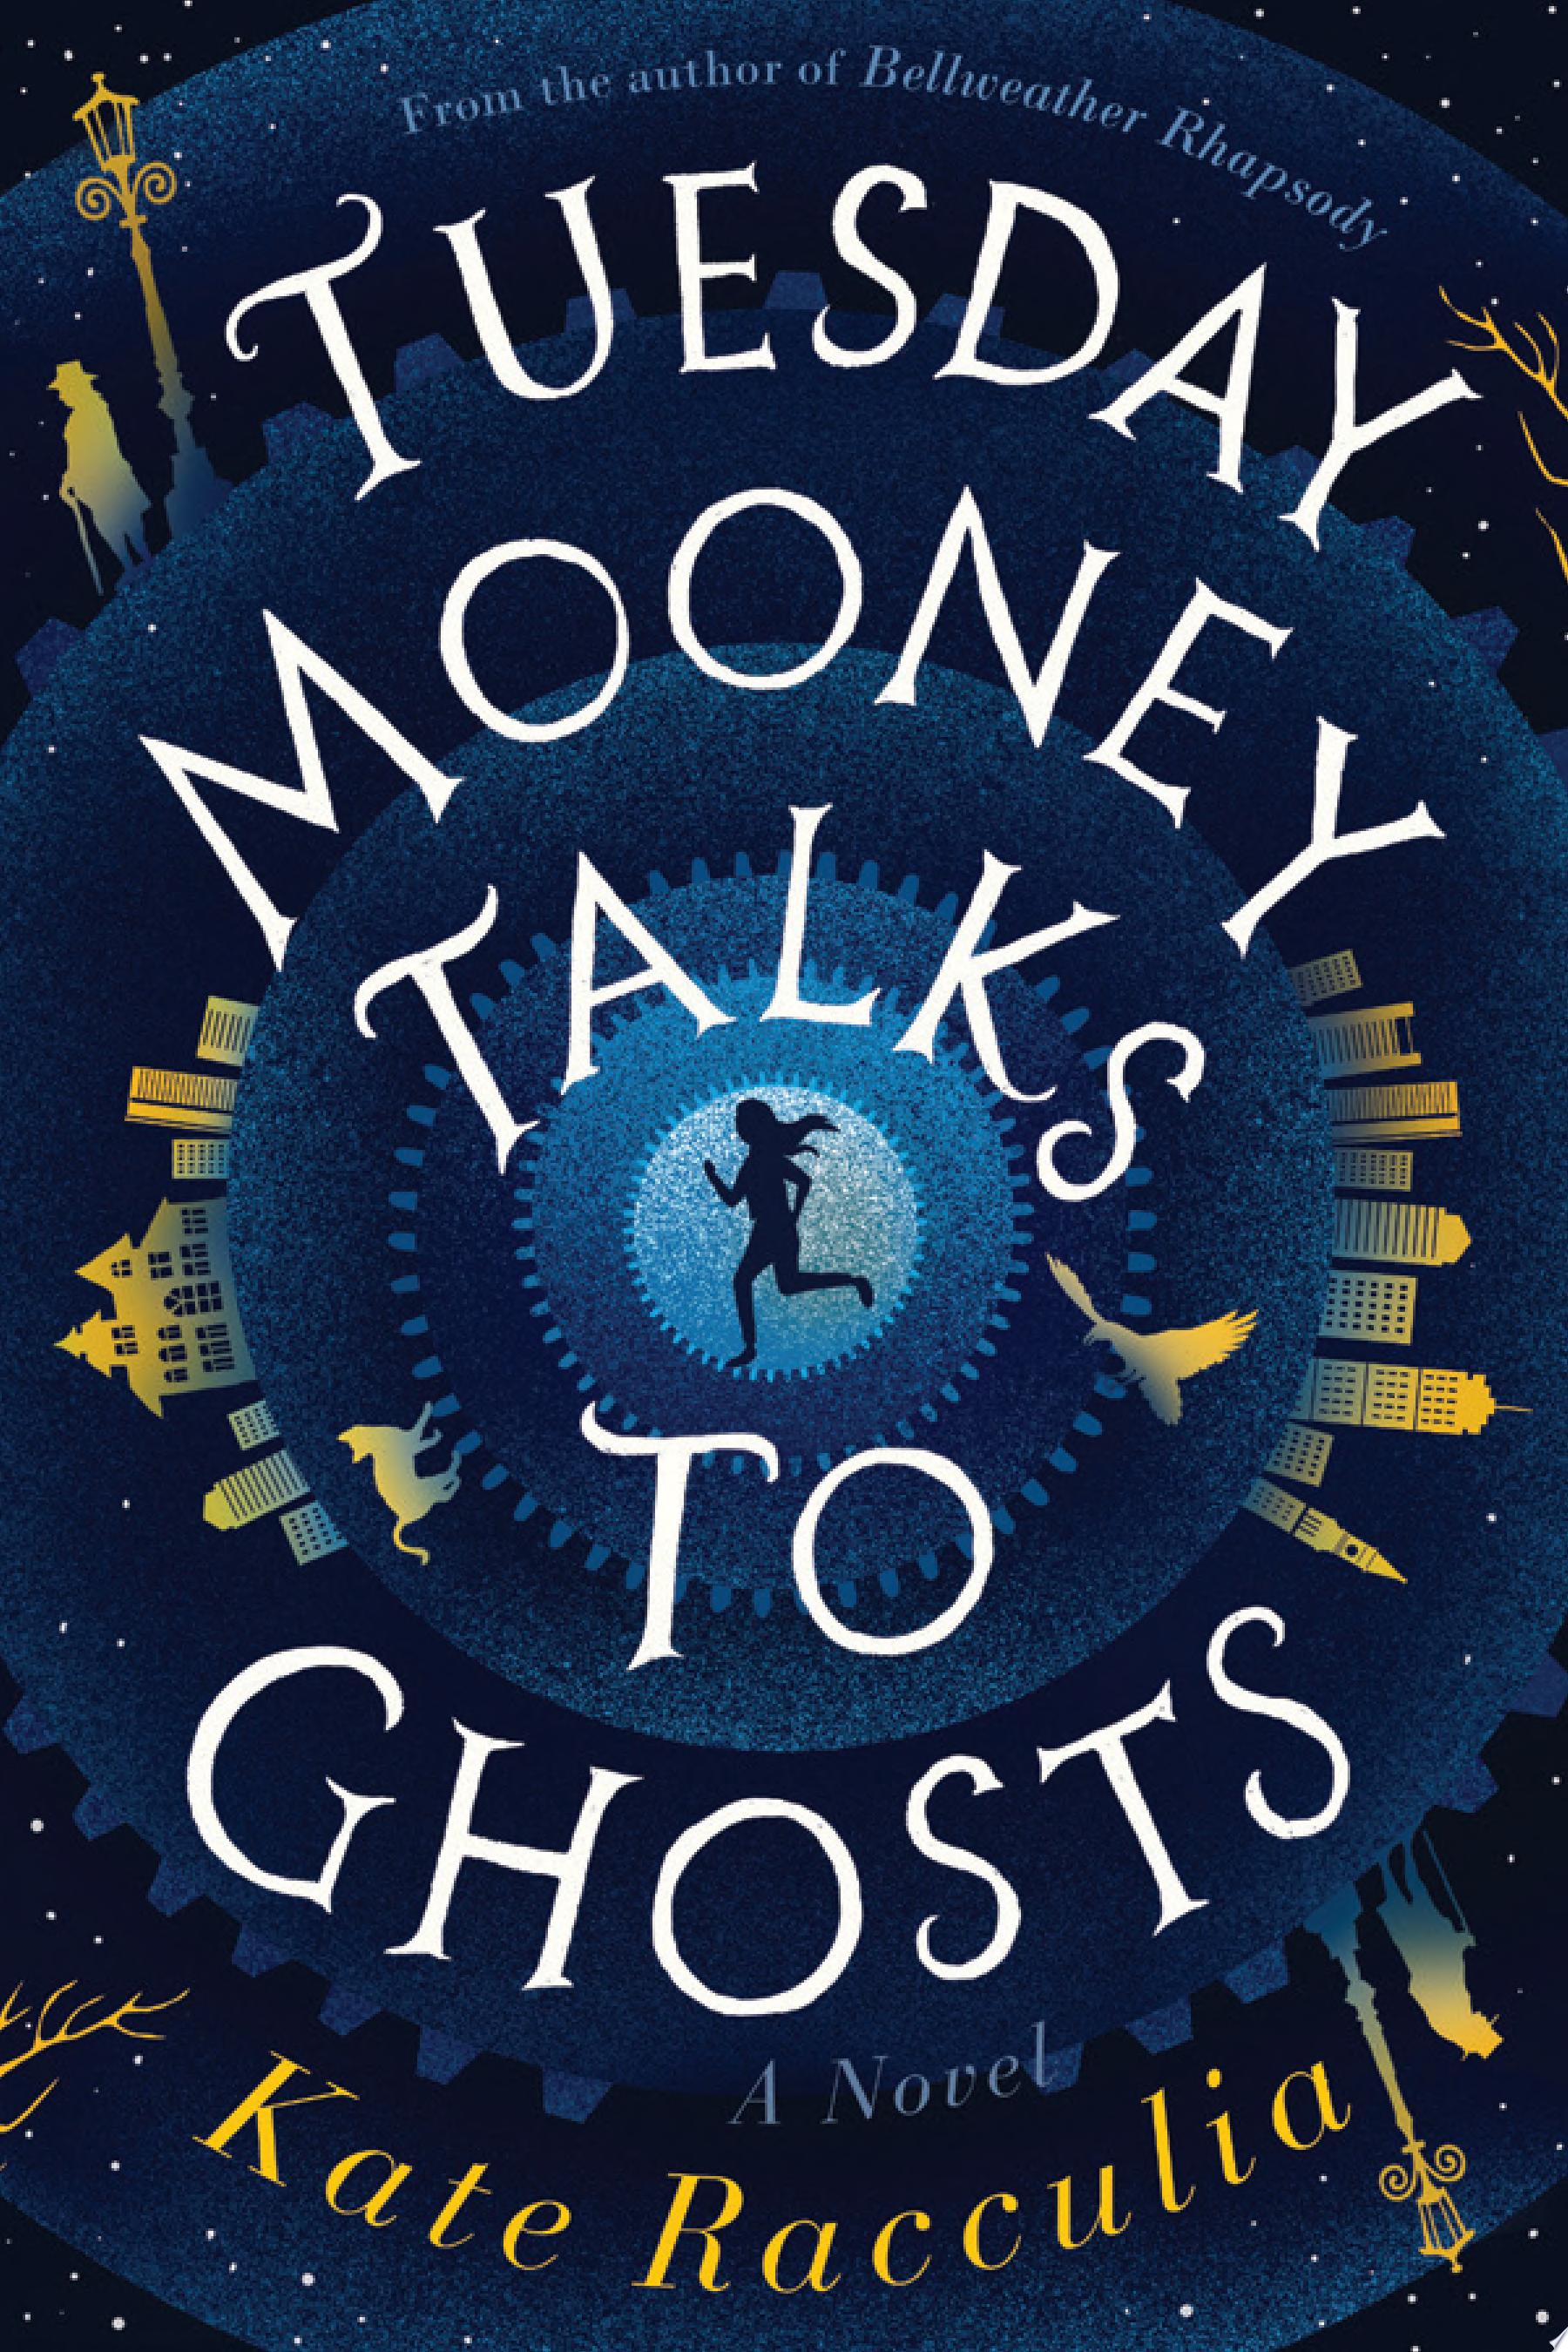 Image for "Tuesday Mooney Talks to Ghosts"